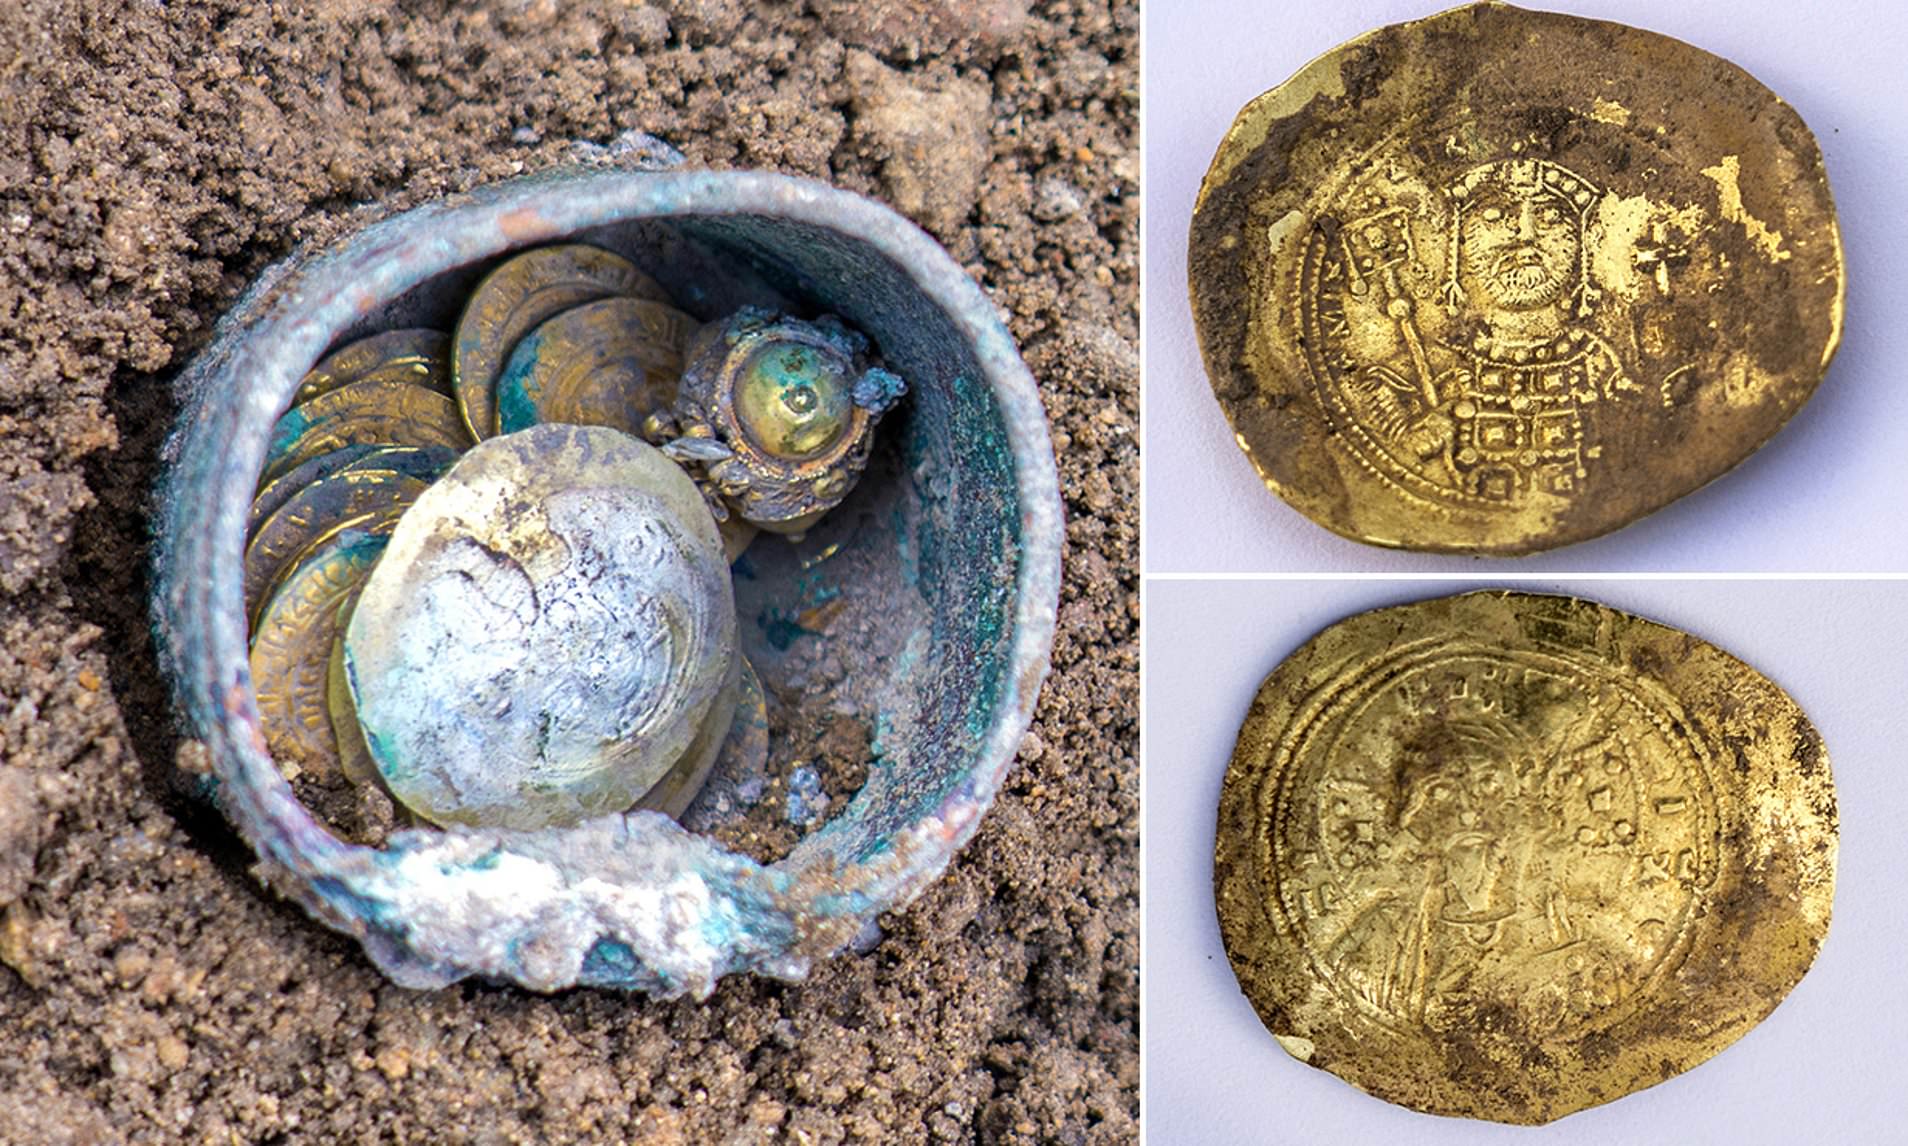 900-year-old gold coins found in Israel | Daily Mail Online